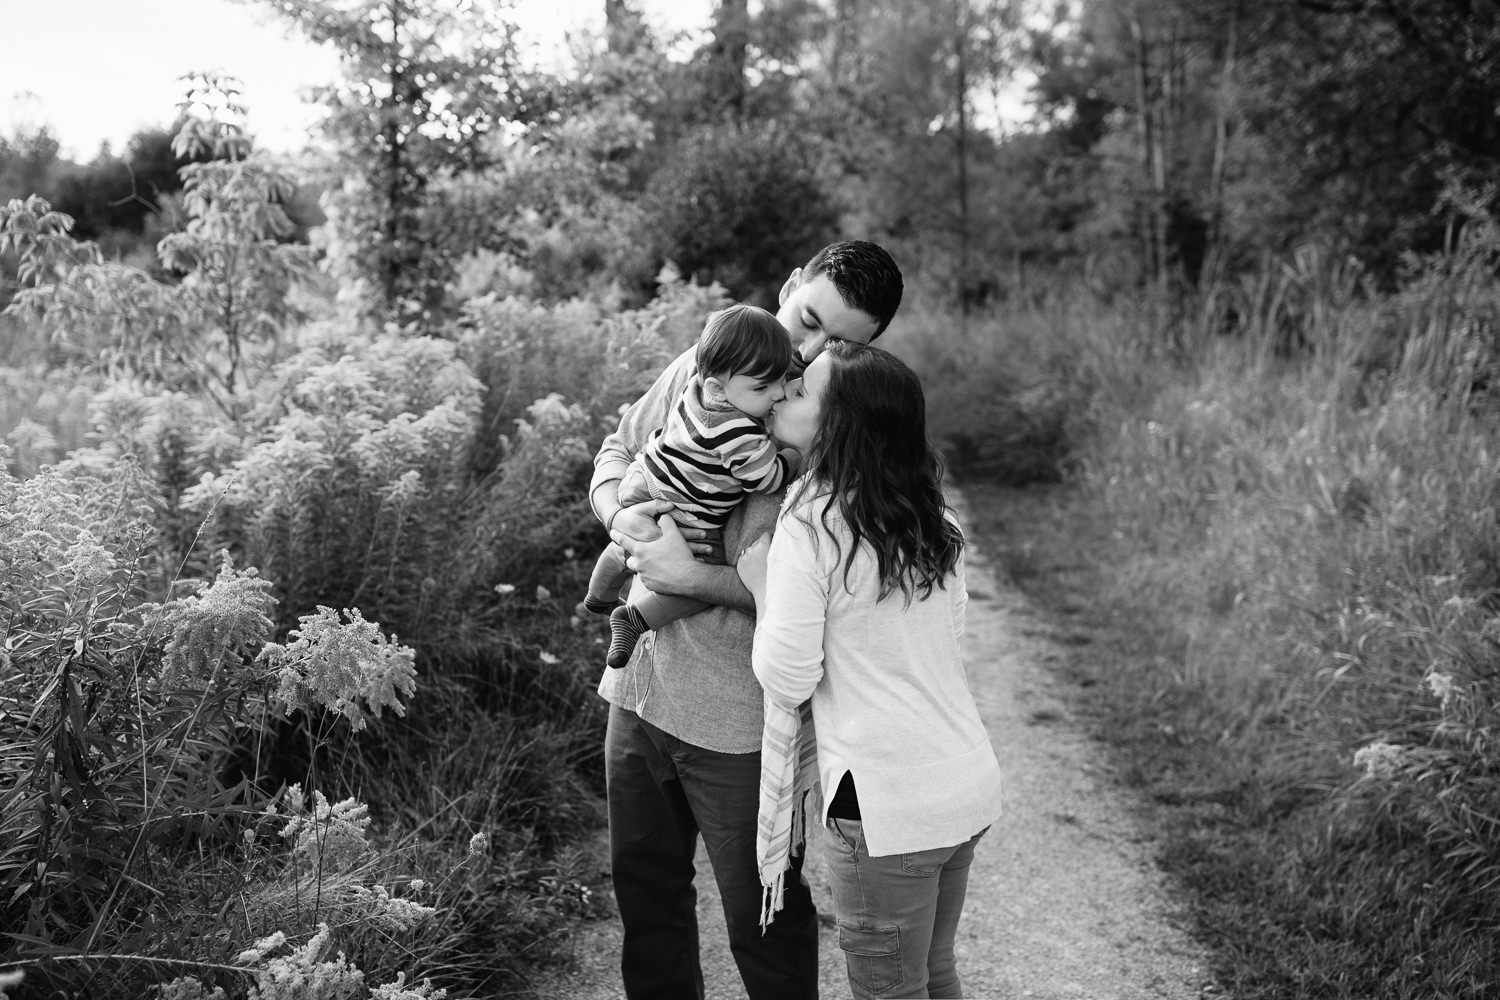 family of 3 standing on path in grassy field, dad holding 1 year old baby boy, mom standing next to husband, leaning over to kiss son - Markham Lifestyle Photos